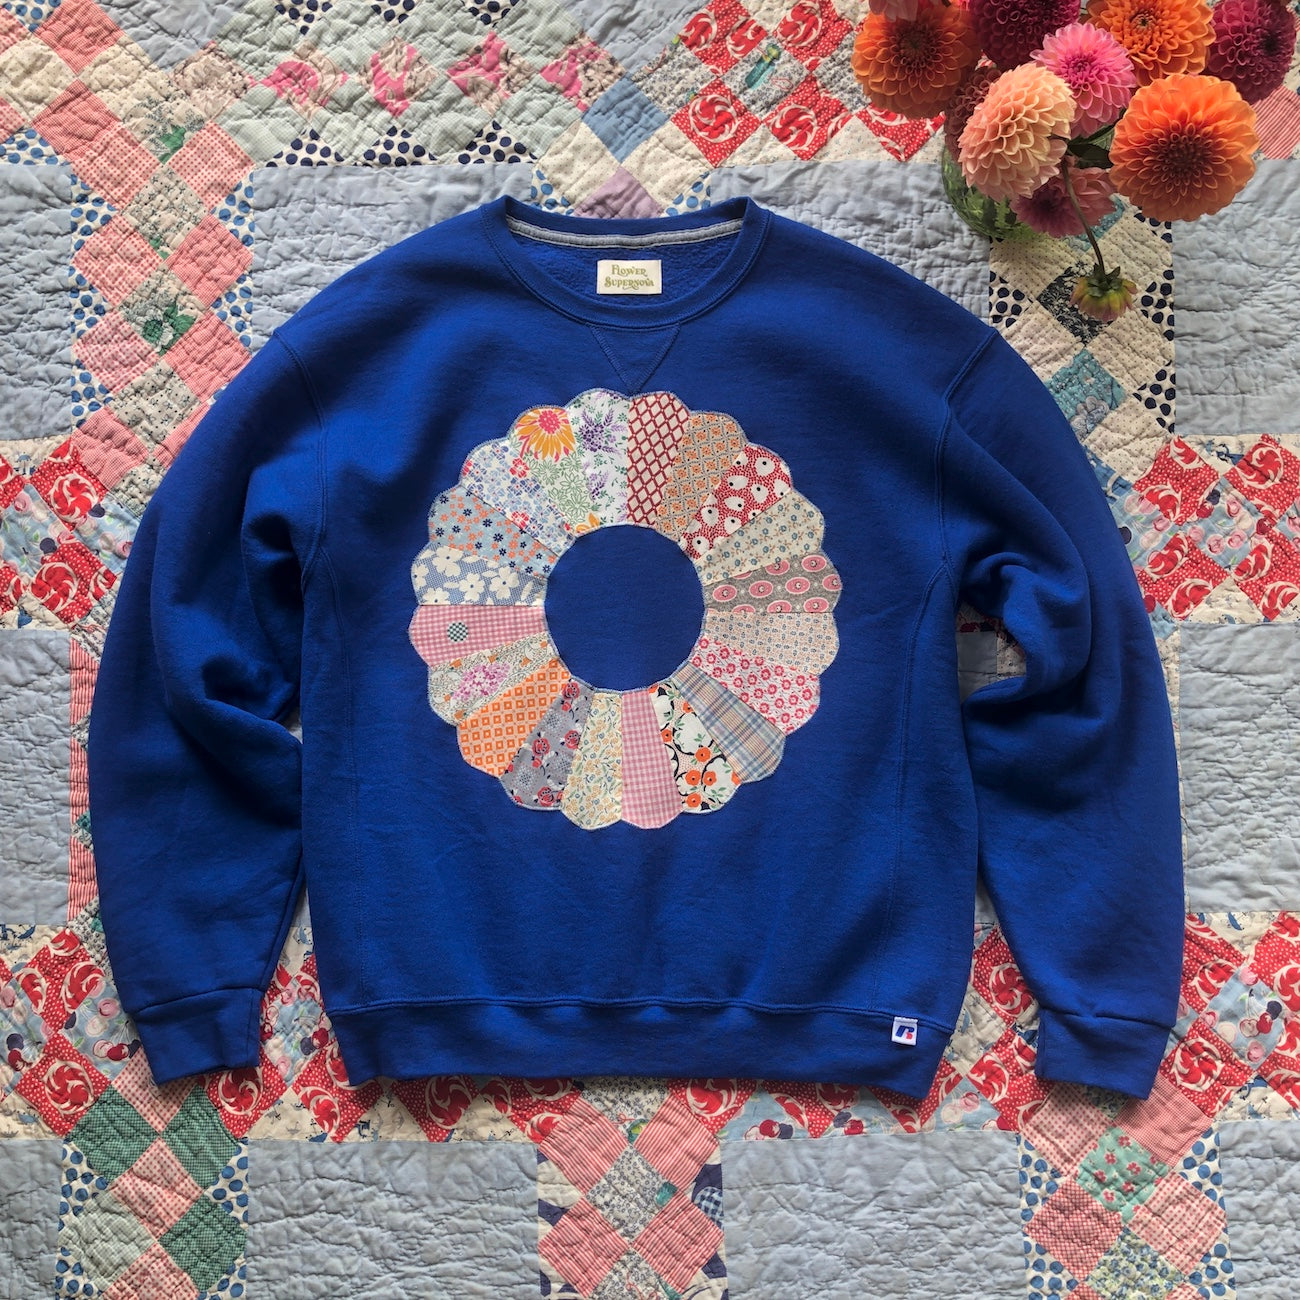 Bright blue crewneck sweatshirt with Dresden Plate vintage quilt patch sewn to front by Flower Supernova.